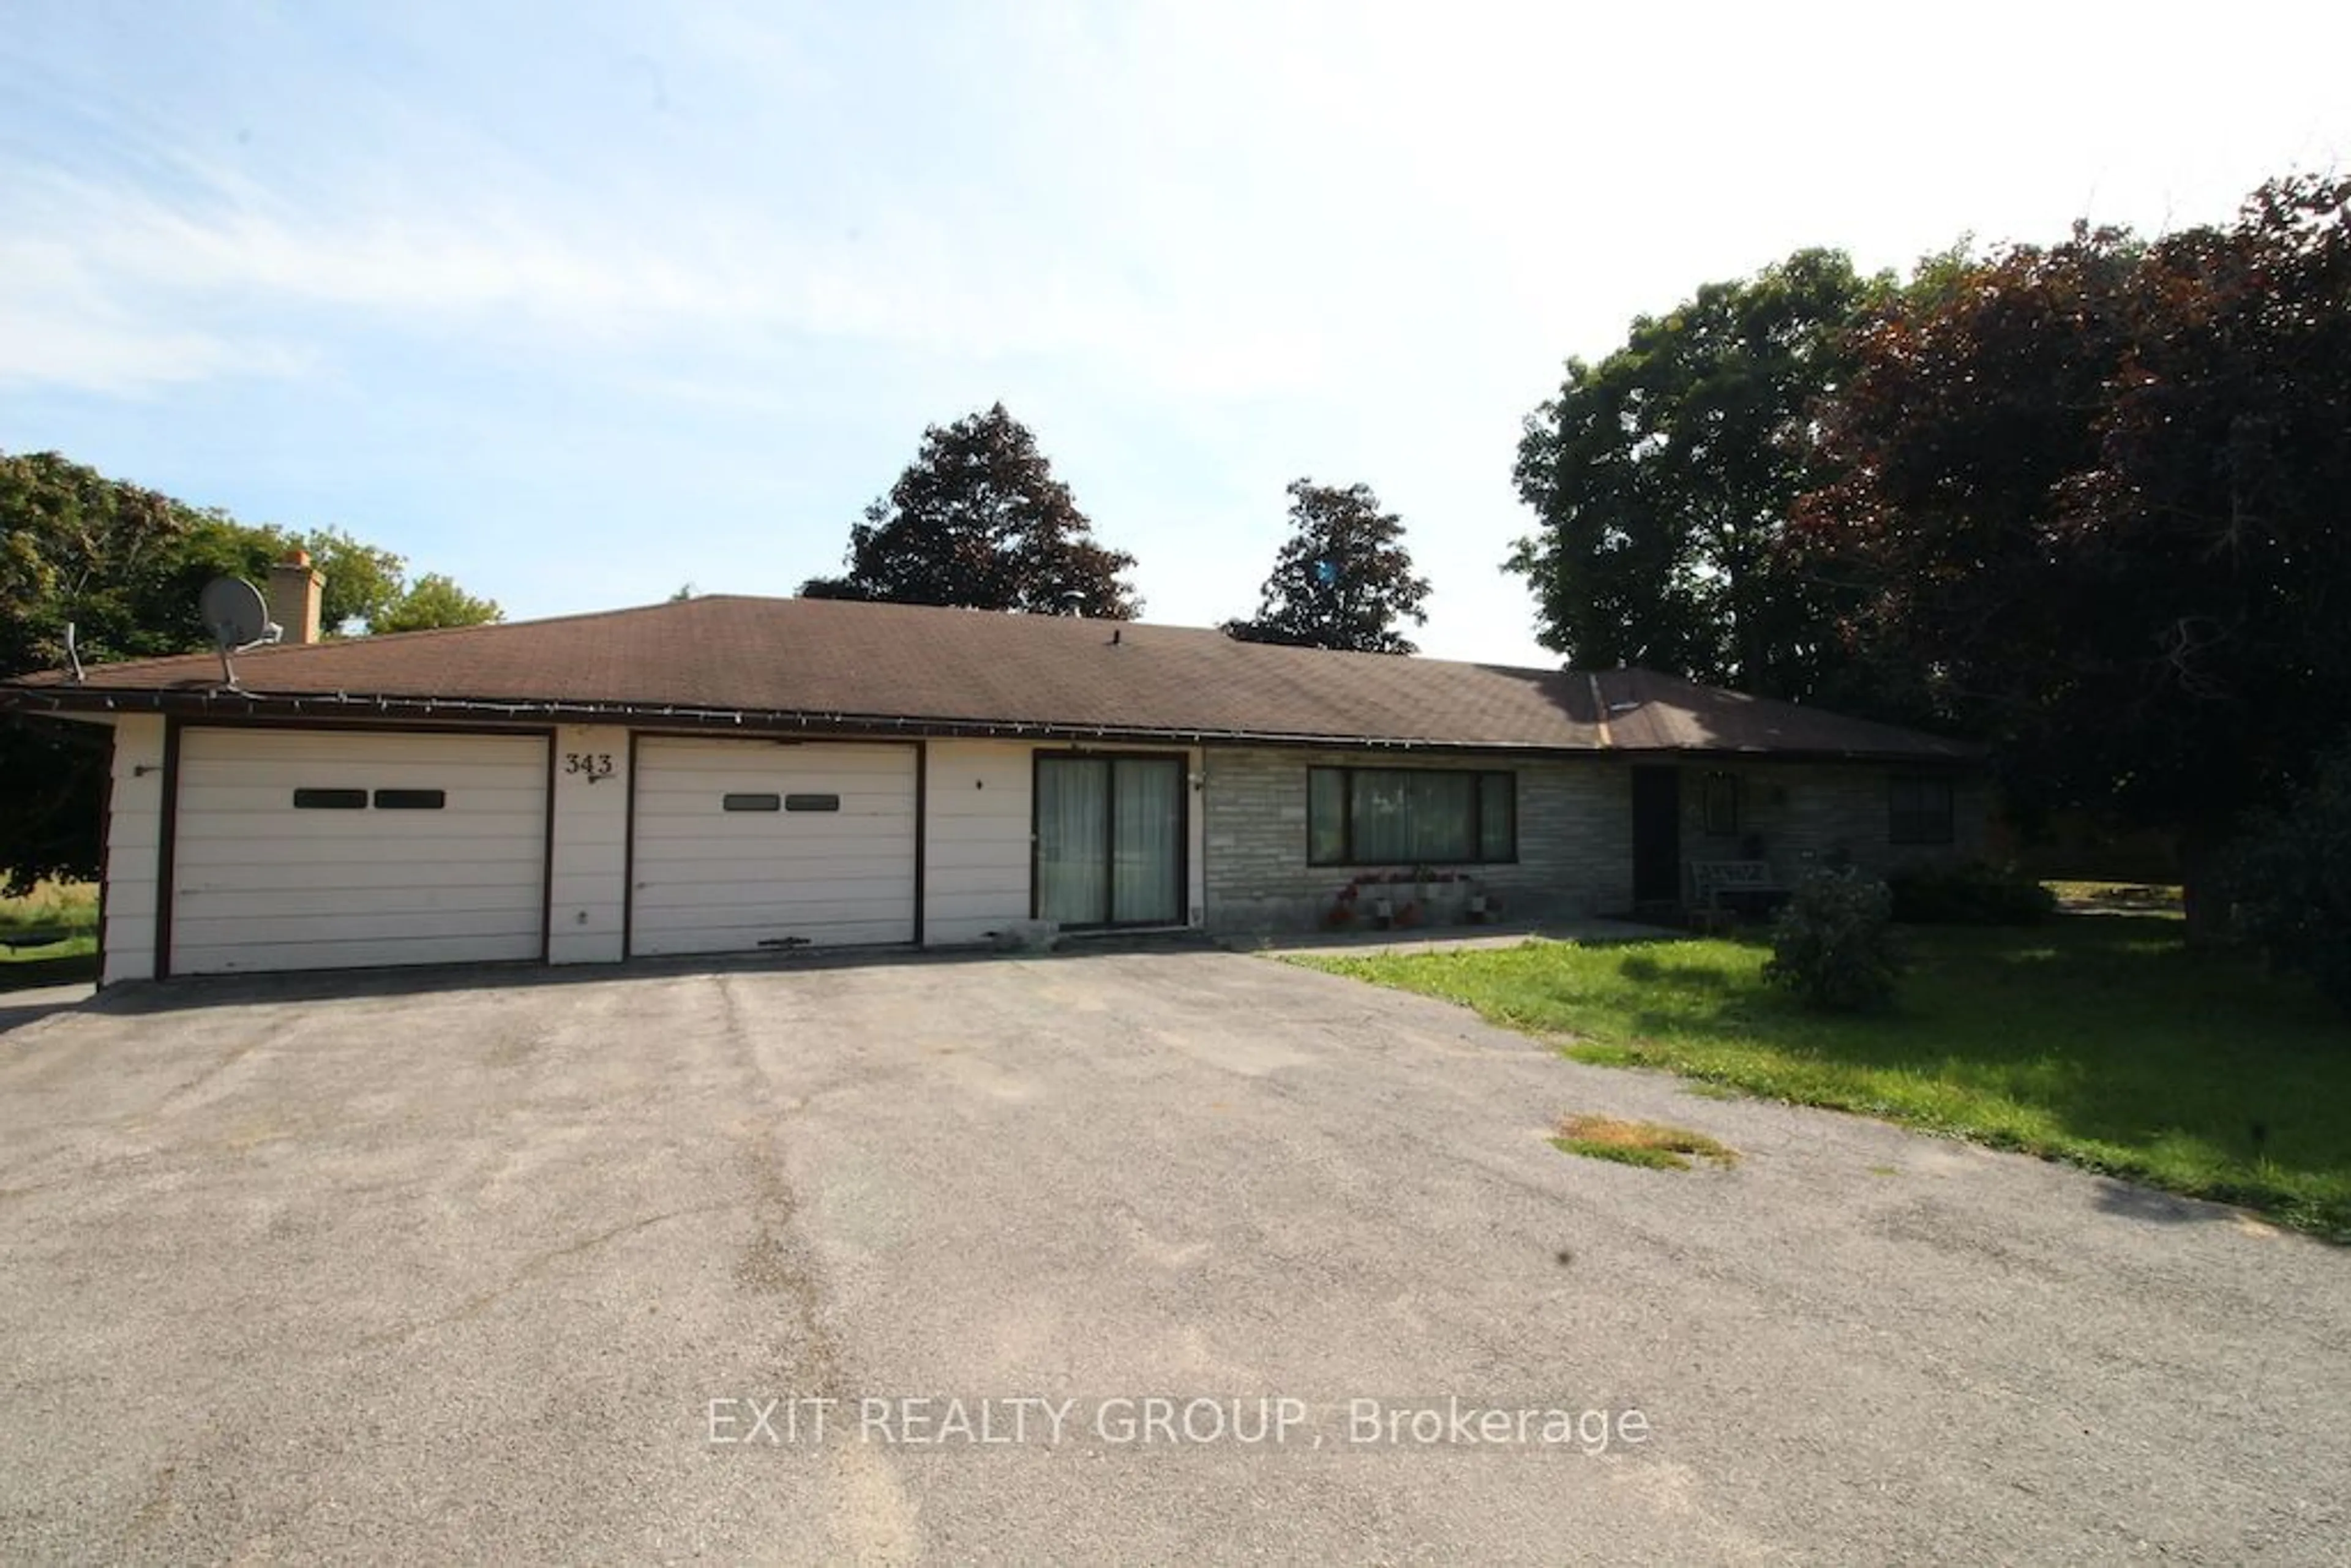 Frontside or backside of a home for 343 W Front St, Stirling-Rawdon Ontario K0K 3E0